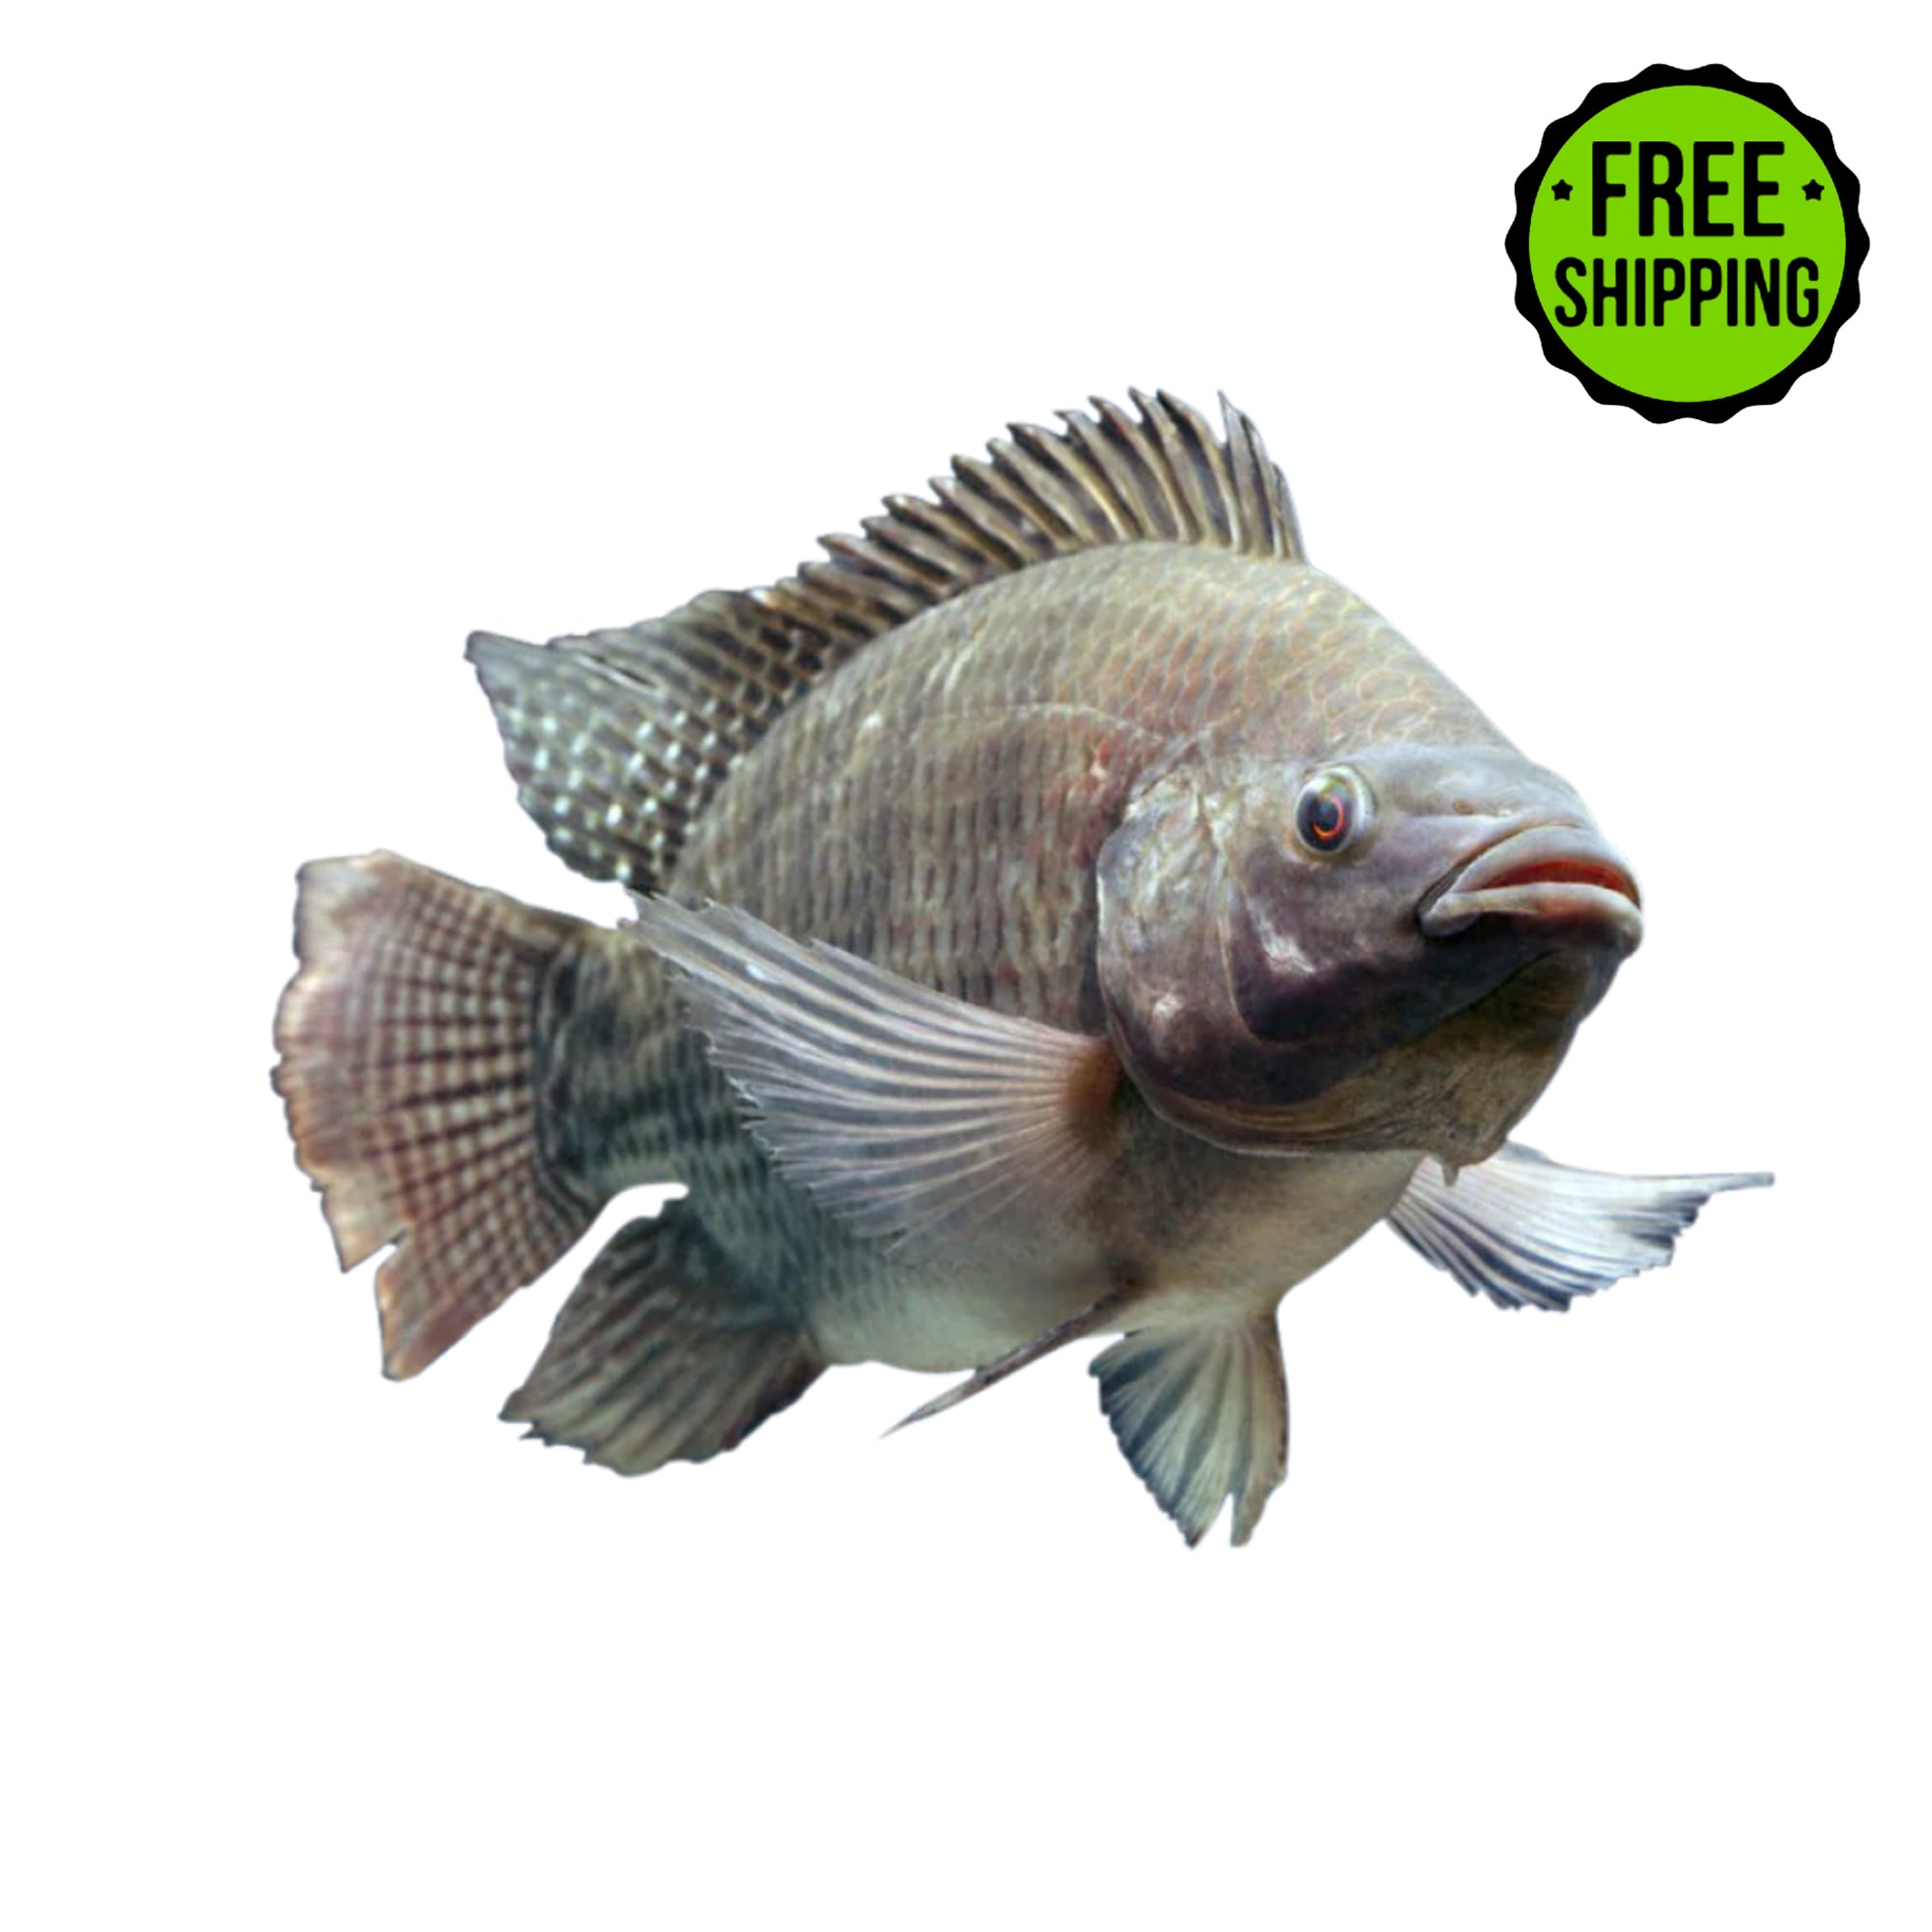 A Blue Tilapia Fingerlings fish with the words free shipping on it from Tilapia Depot.